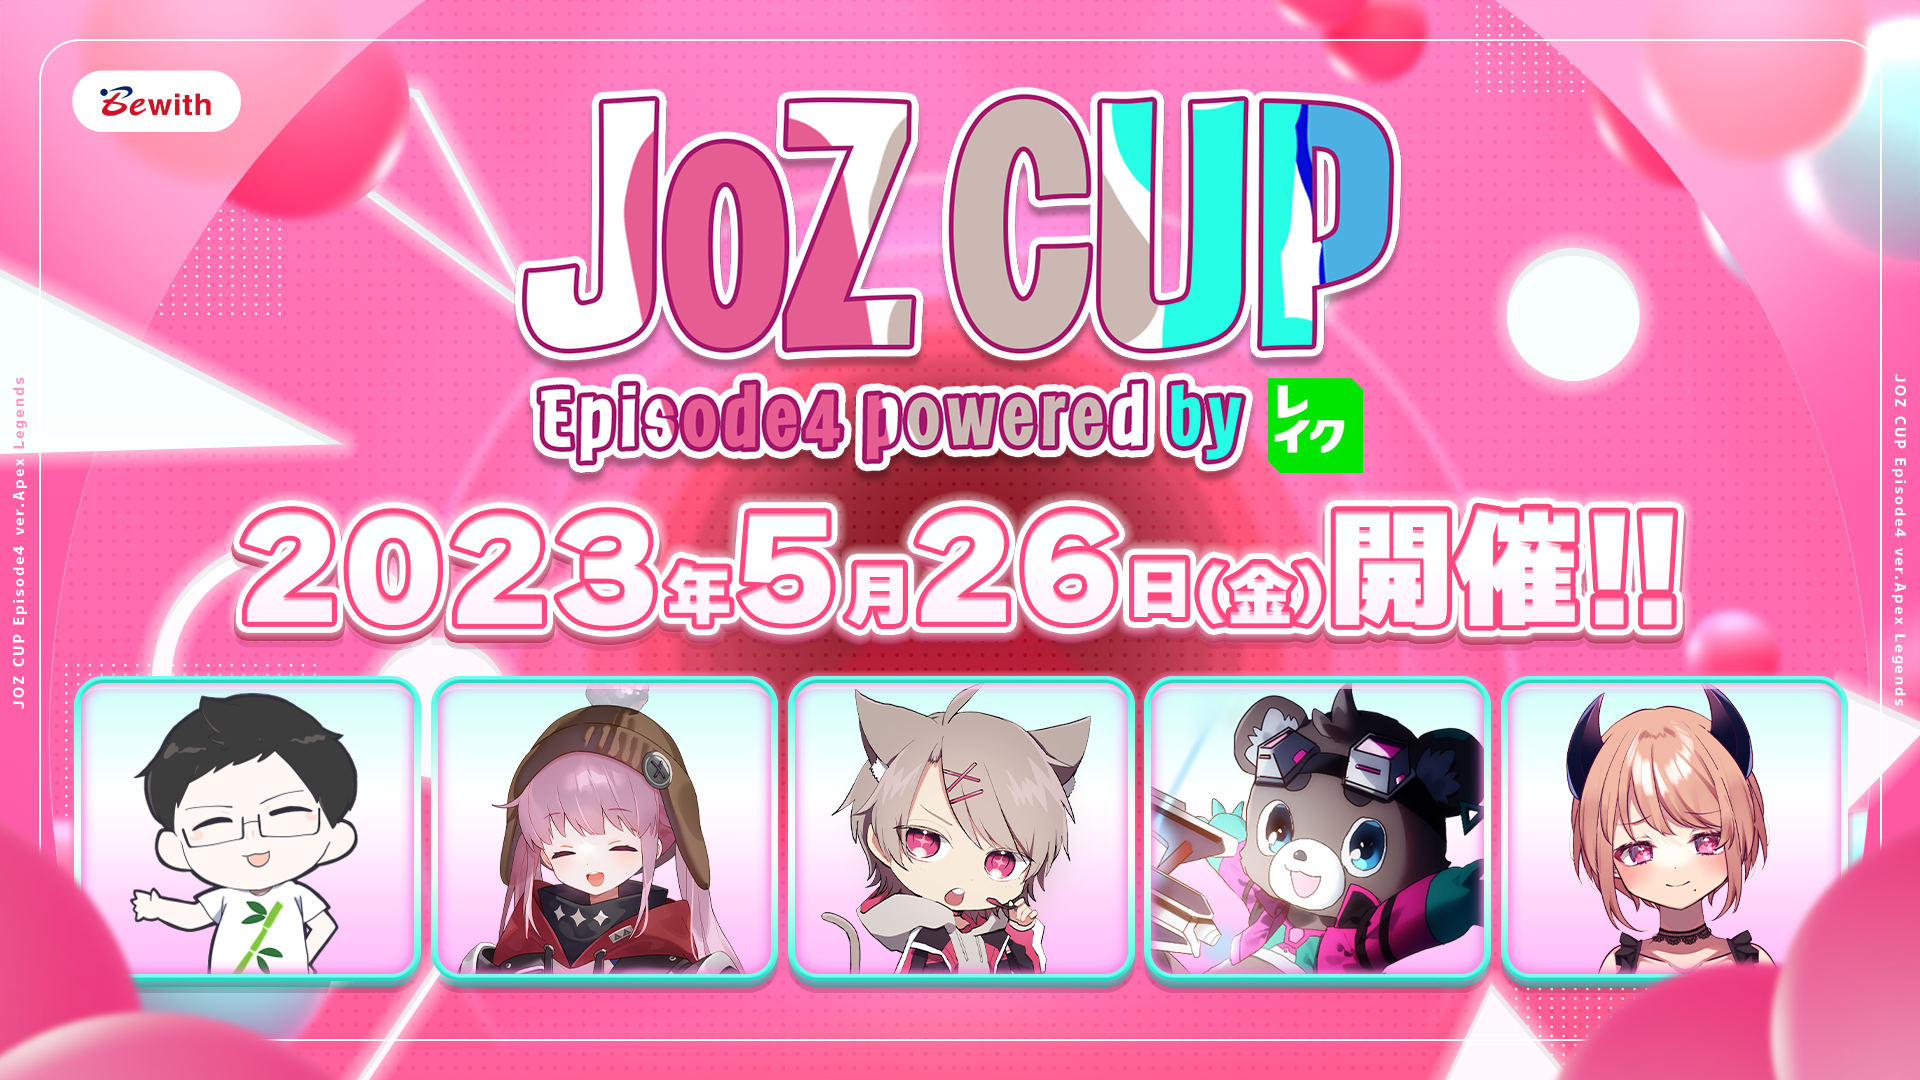 JOZ CUP Episode4 powered by レイク